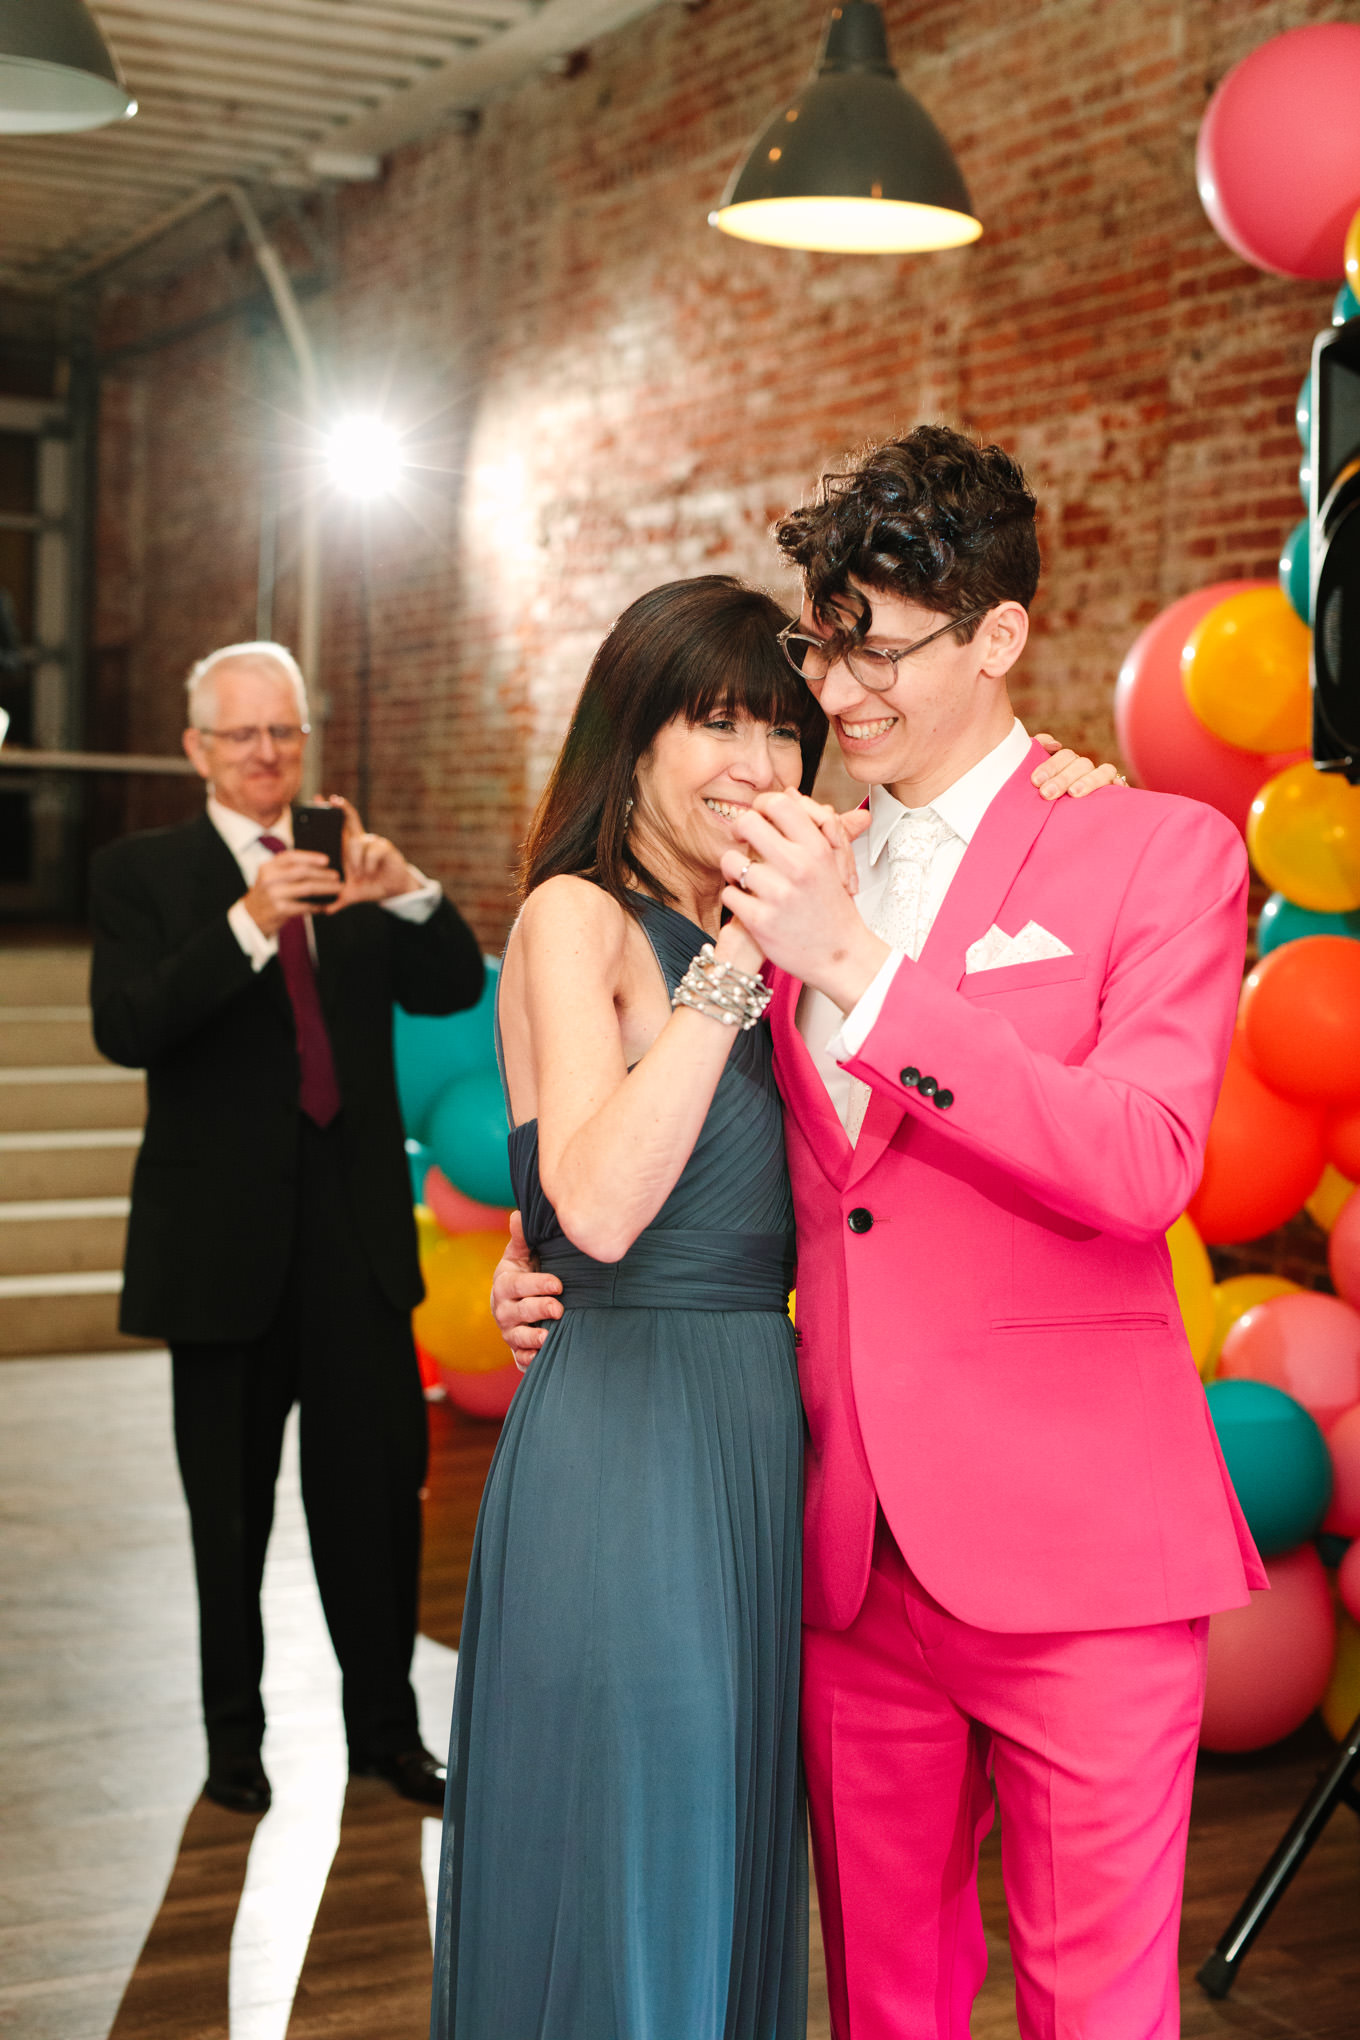 Groom dancing with mom | Colorful wedding at The Unique Space Los Angeles published in The Knot Magazine | Fresh and colorful photography for fun-loving couples in Southern California | #colorfulwedding #losangeleswedding #weddingphotography #uniquespace Source: Mary Costa Photography | Los Angeles